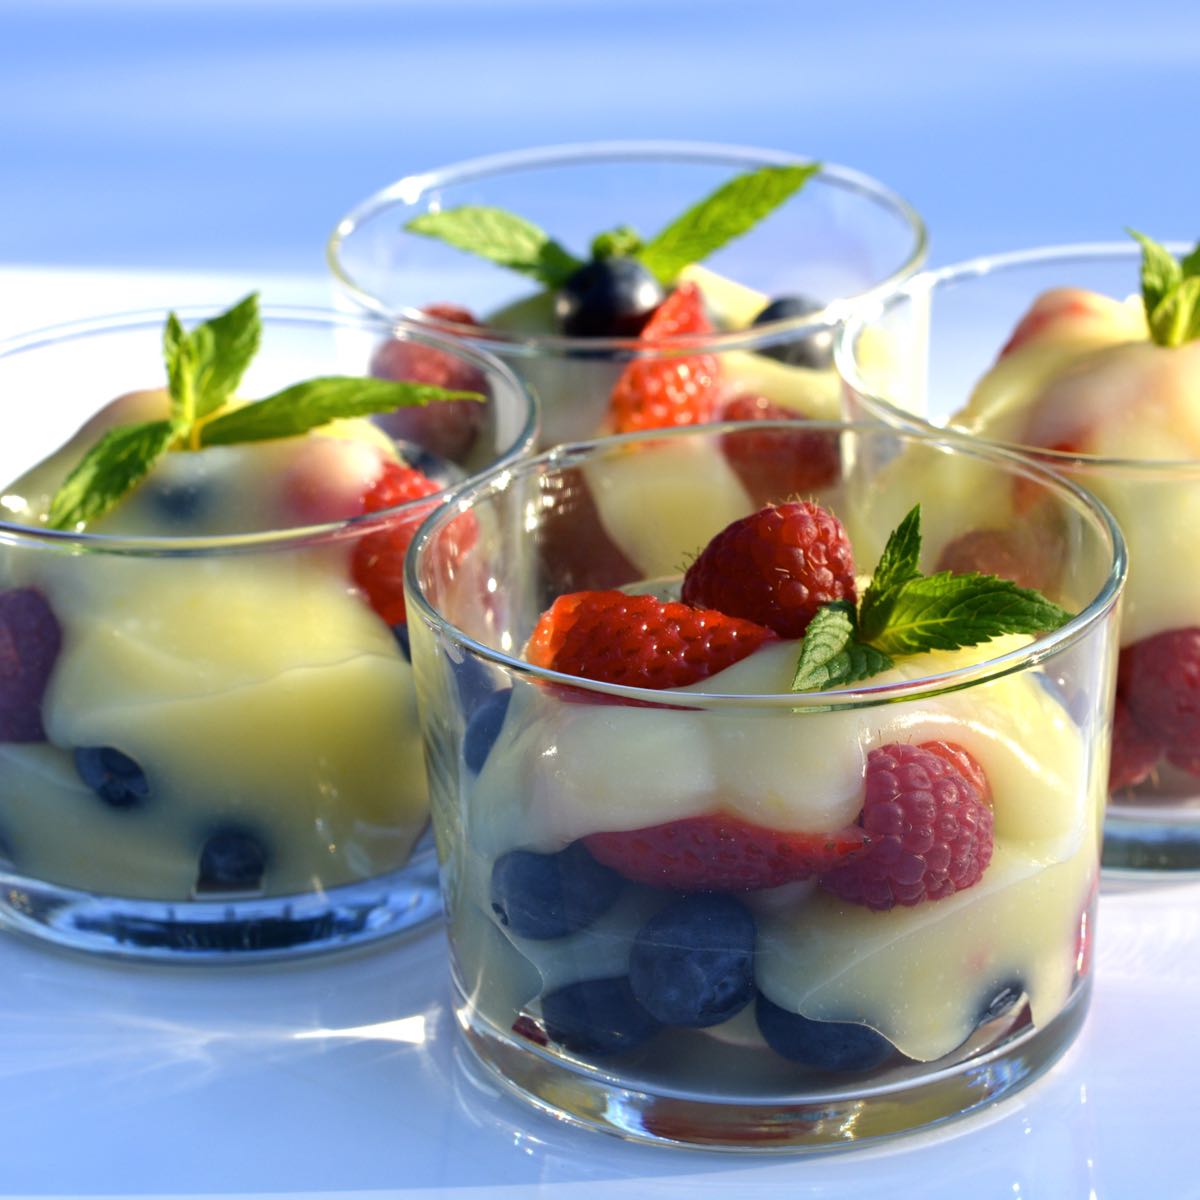 Four dishes of Lemon Curd with fresh strawberries and blueberries.